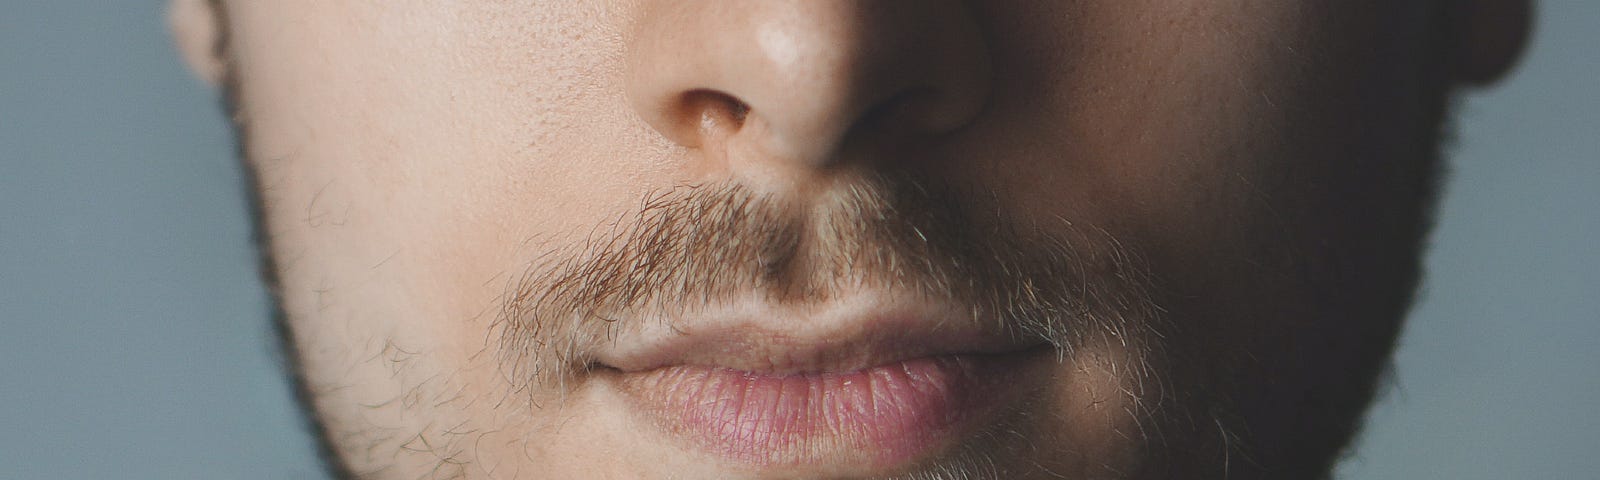 The lower half of a man’s face with mild facial hair.